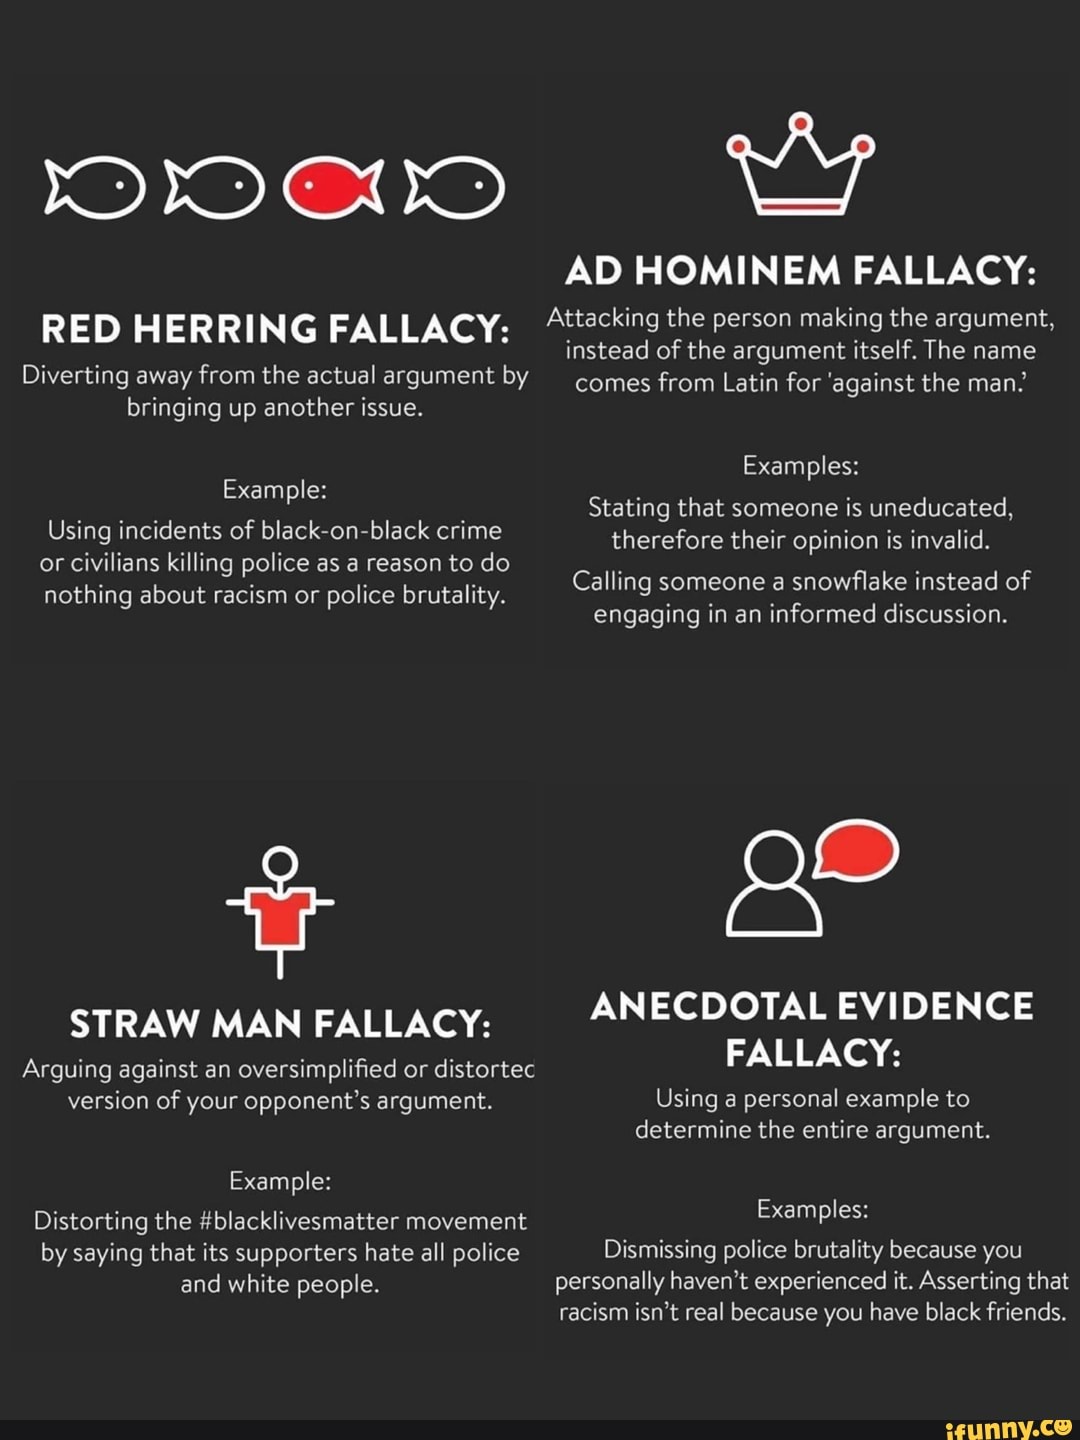 examples of red herring fallacy in politics